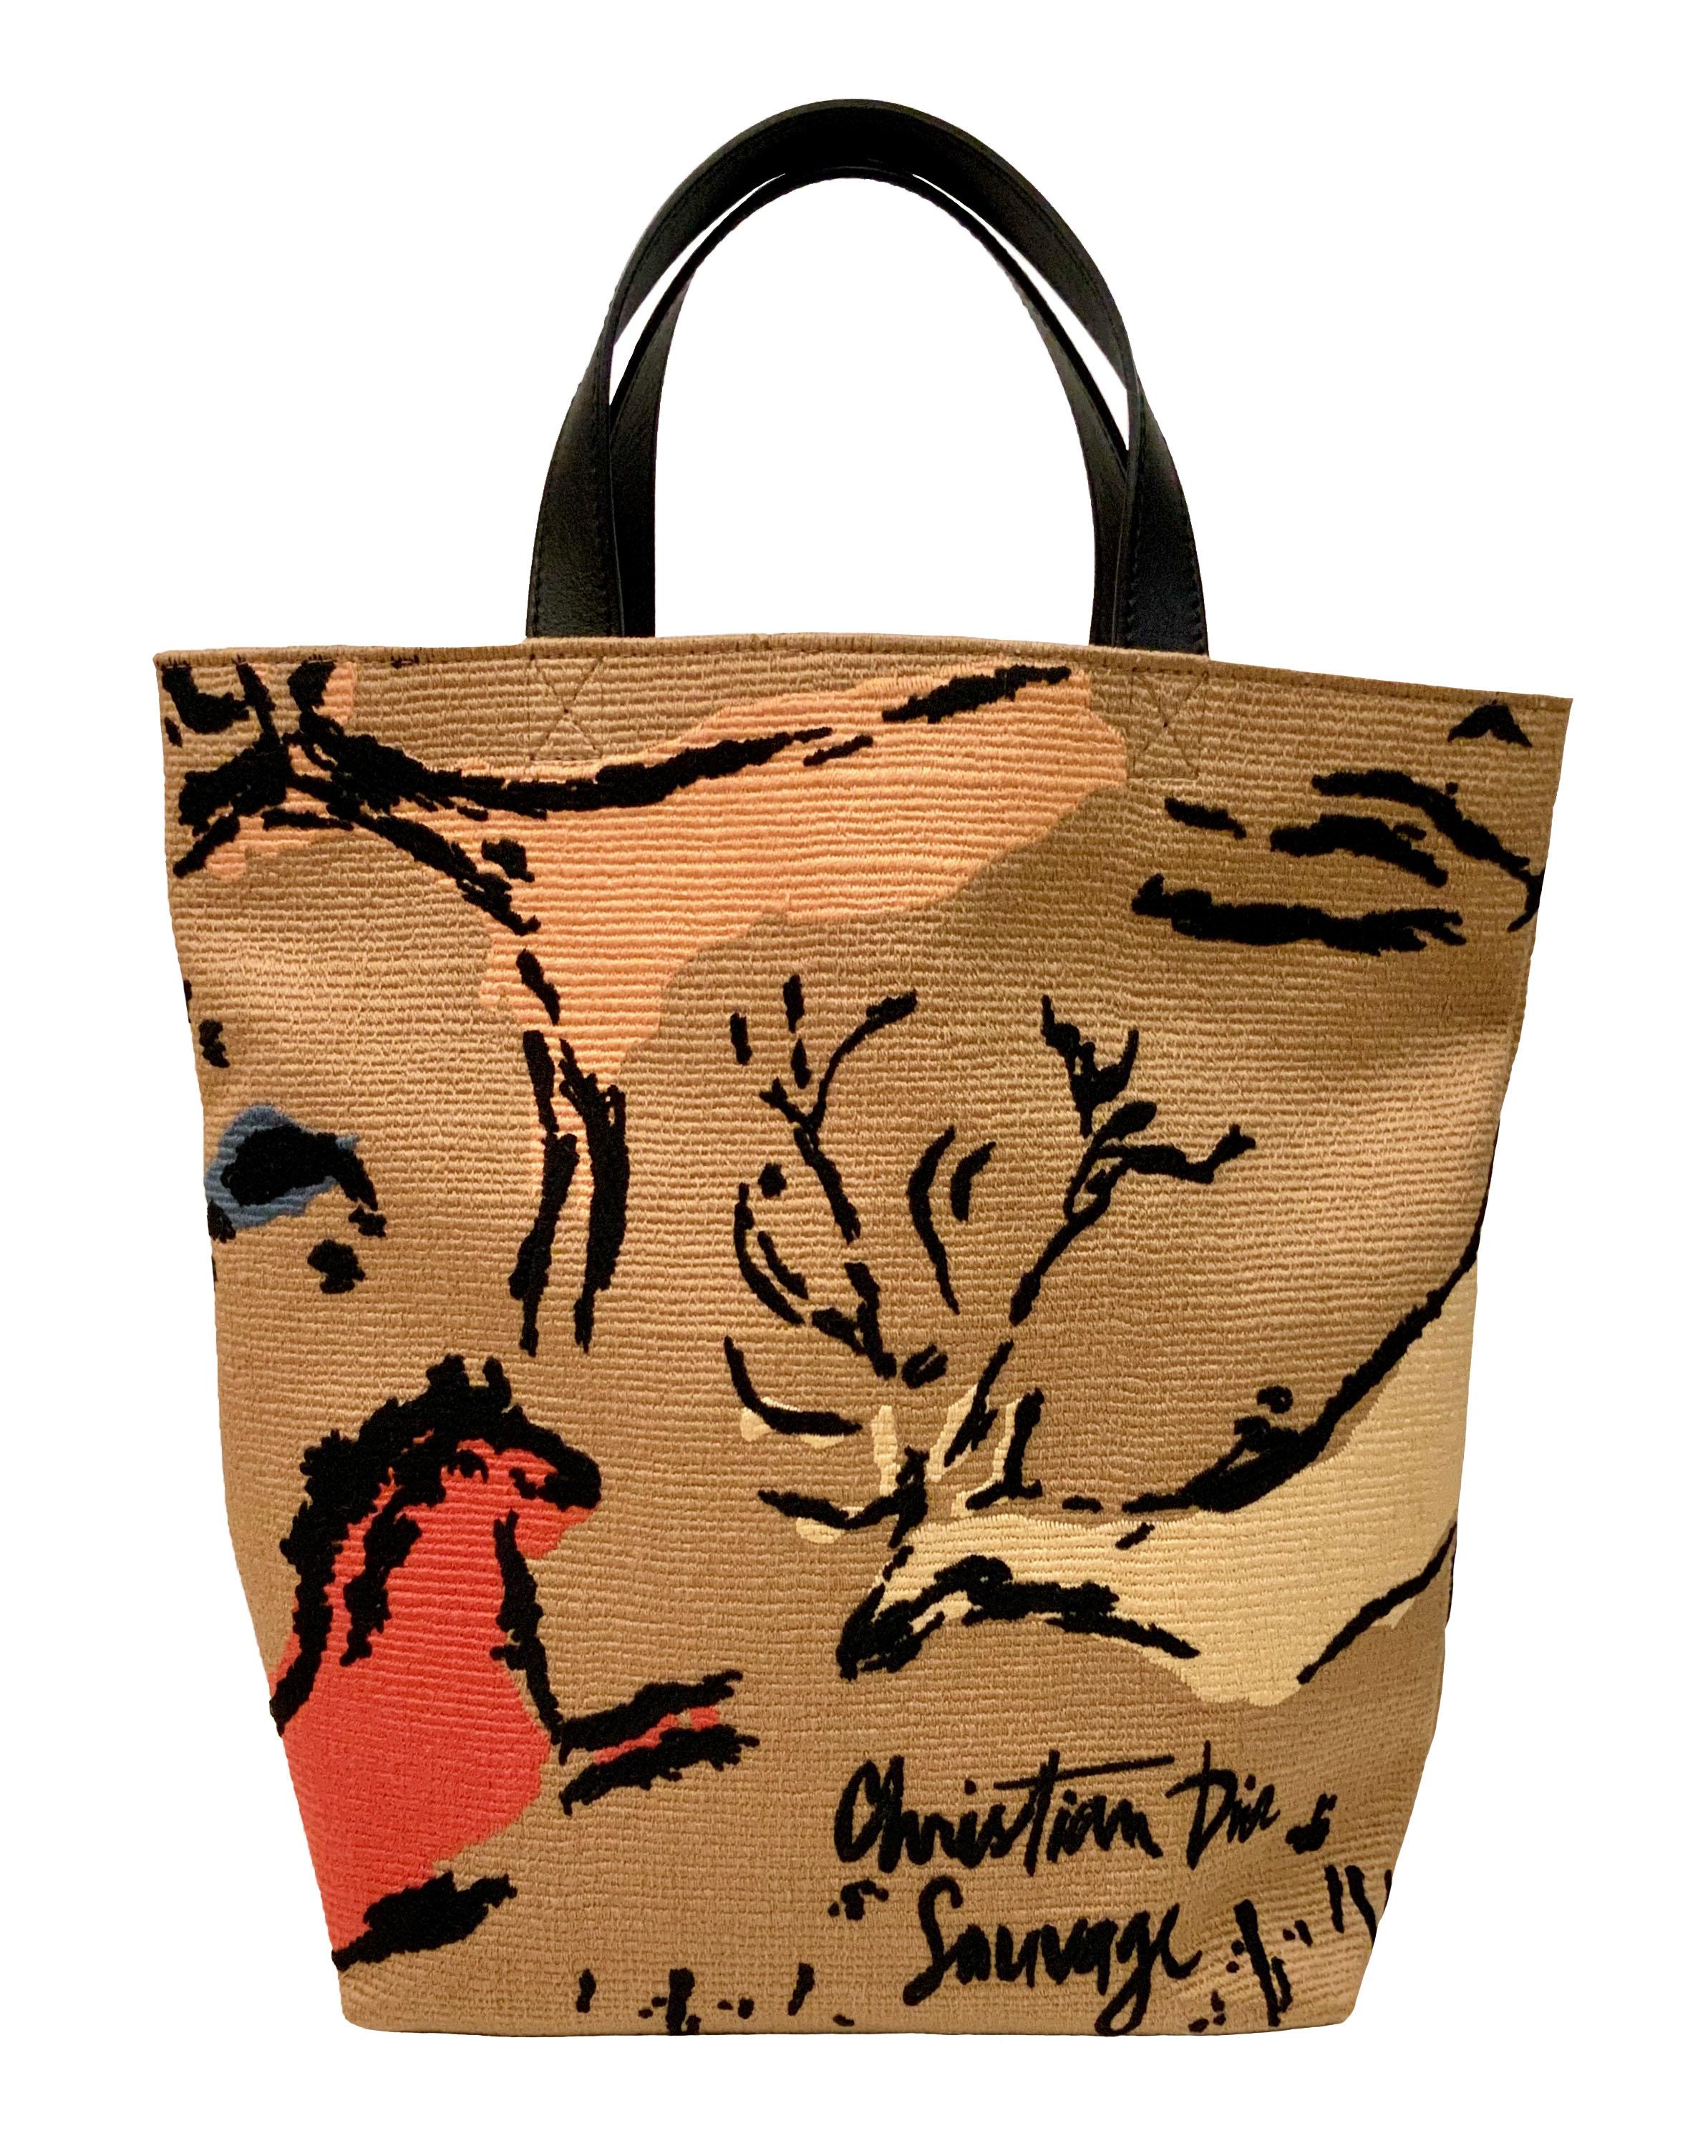 This pre-owned canvas tote bag from Christian Dior comes with a shawl and a pair of  embroidered suede gloves and was a special gift to super VIPS to the 2018 Cruise Collection held in the Santa Monica mountains.

Collection : Cruise 2018

TOTE BAG